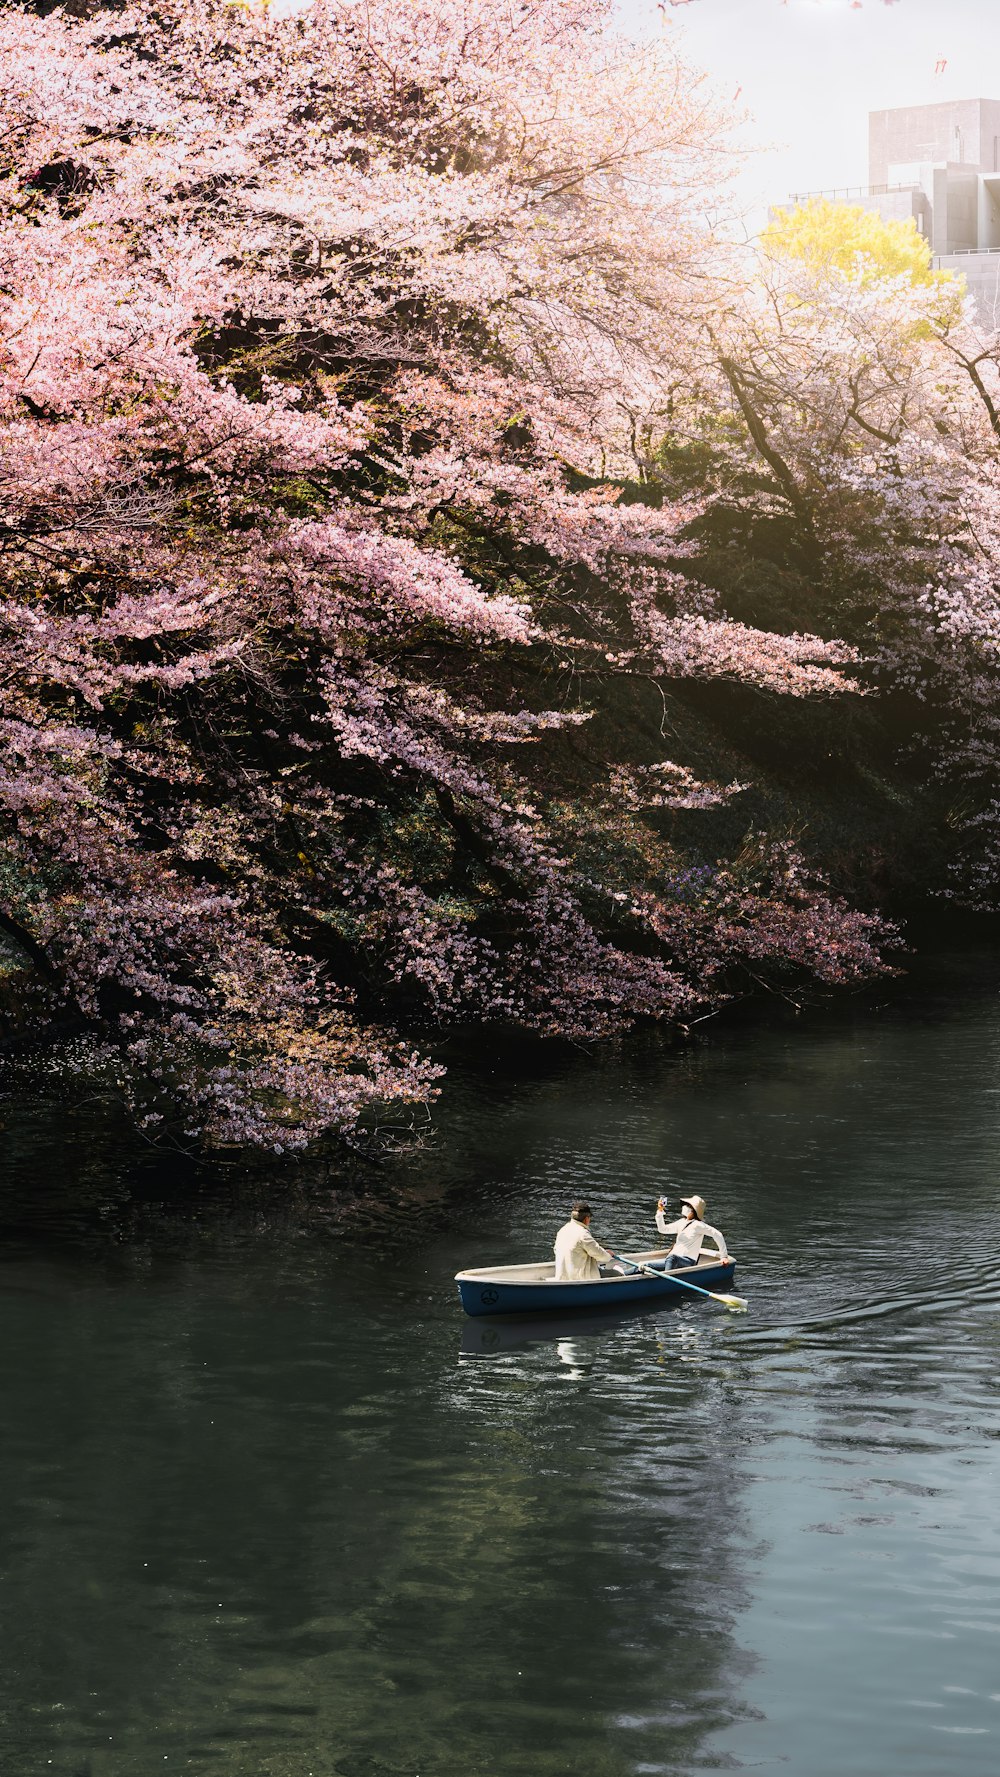 two people in a small boat on a river